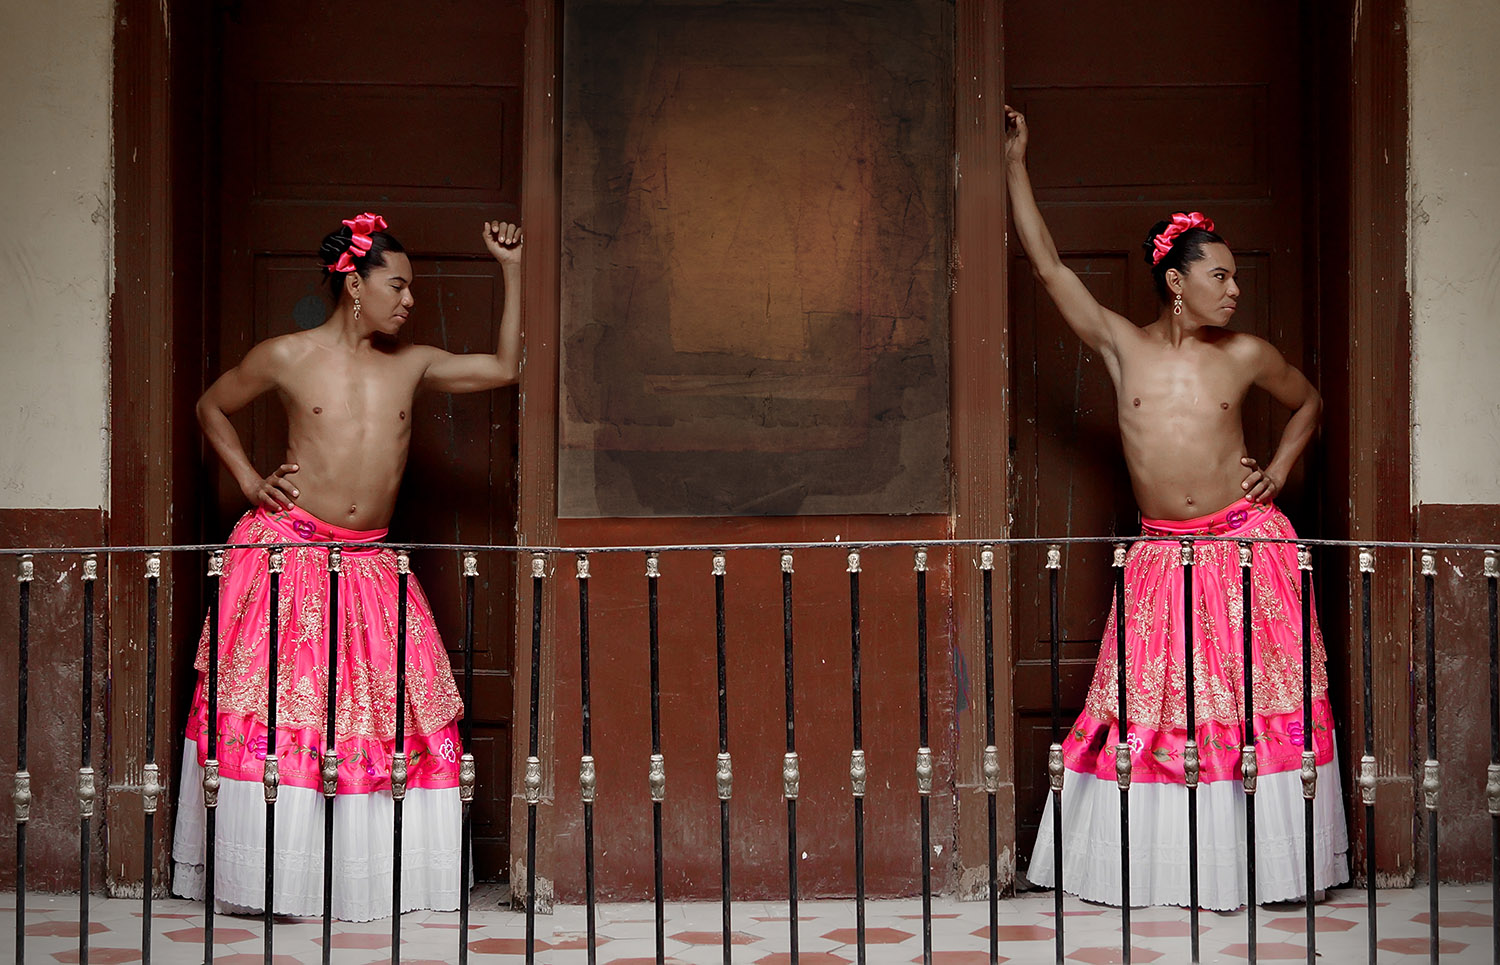 Two identical people lean against a doorframe, shirtless wearing a pink skirt and pink bow.